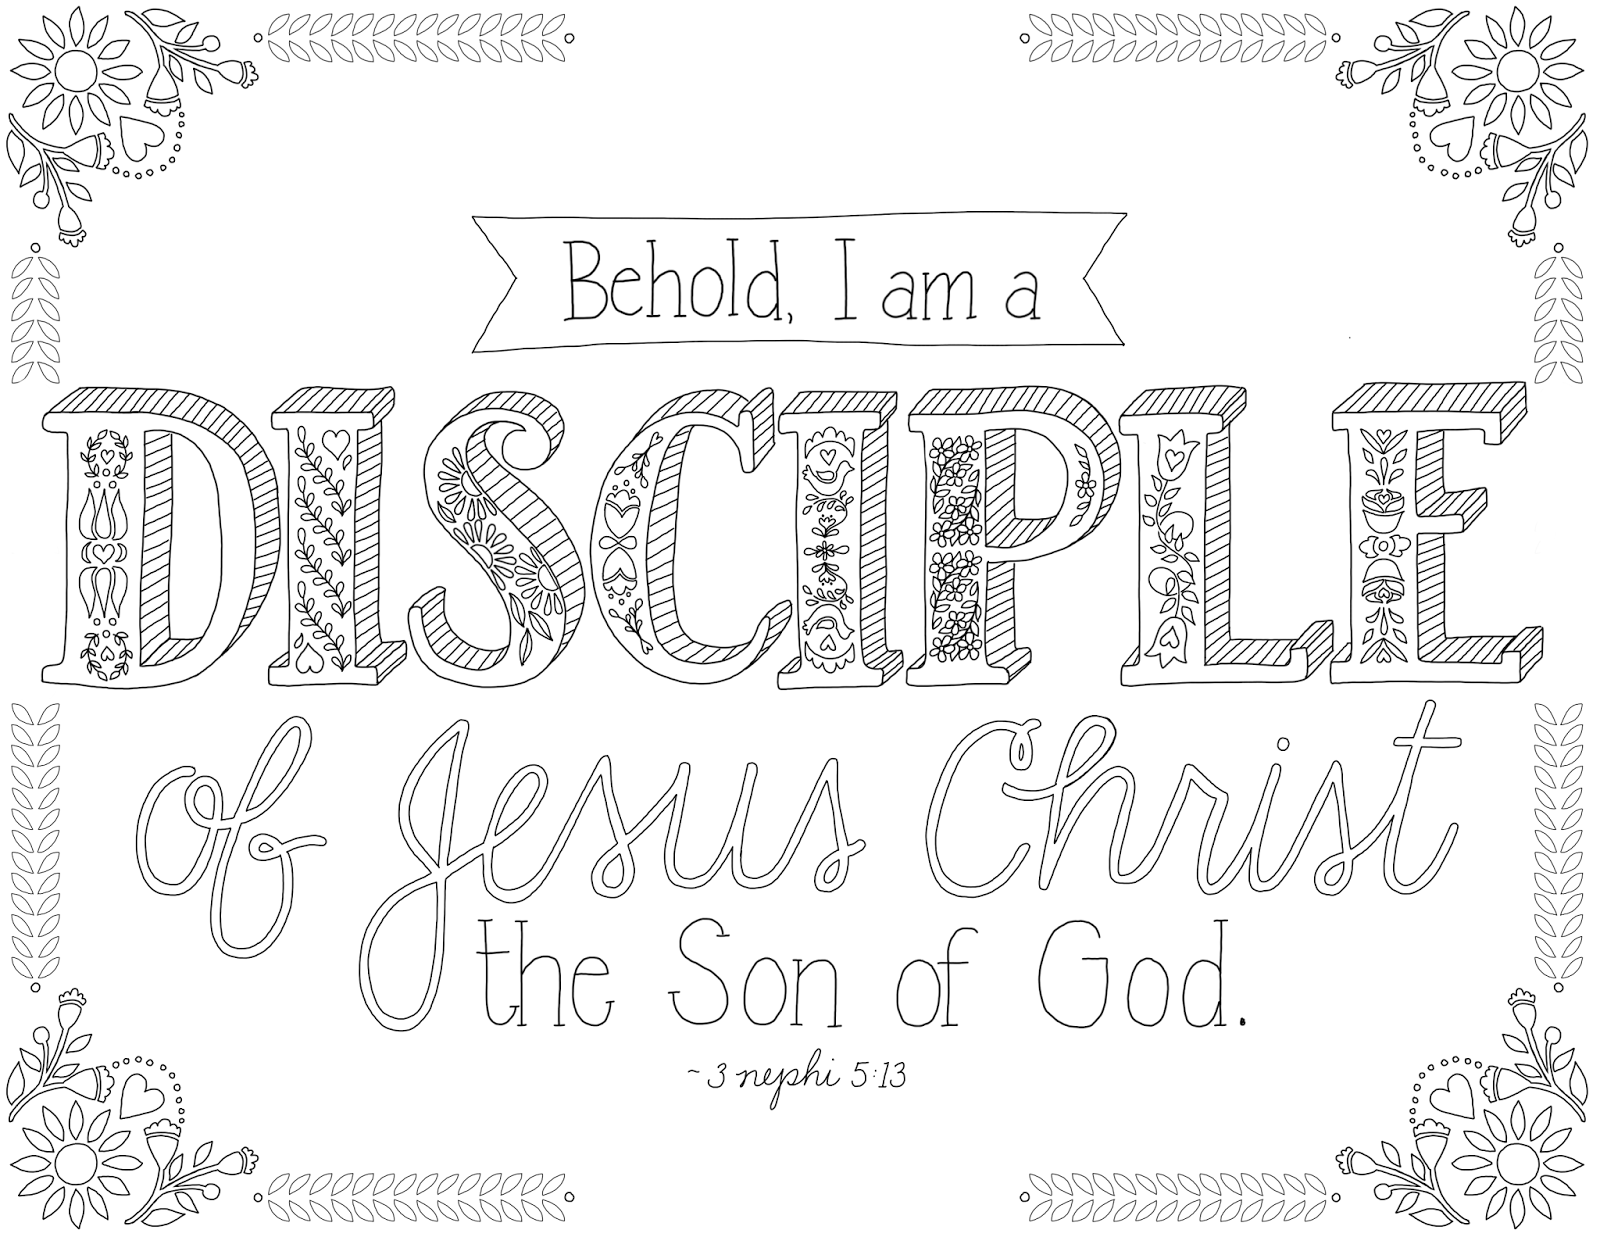 Just what i squeeze in i am a disciple